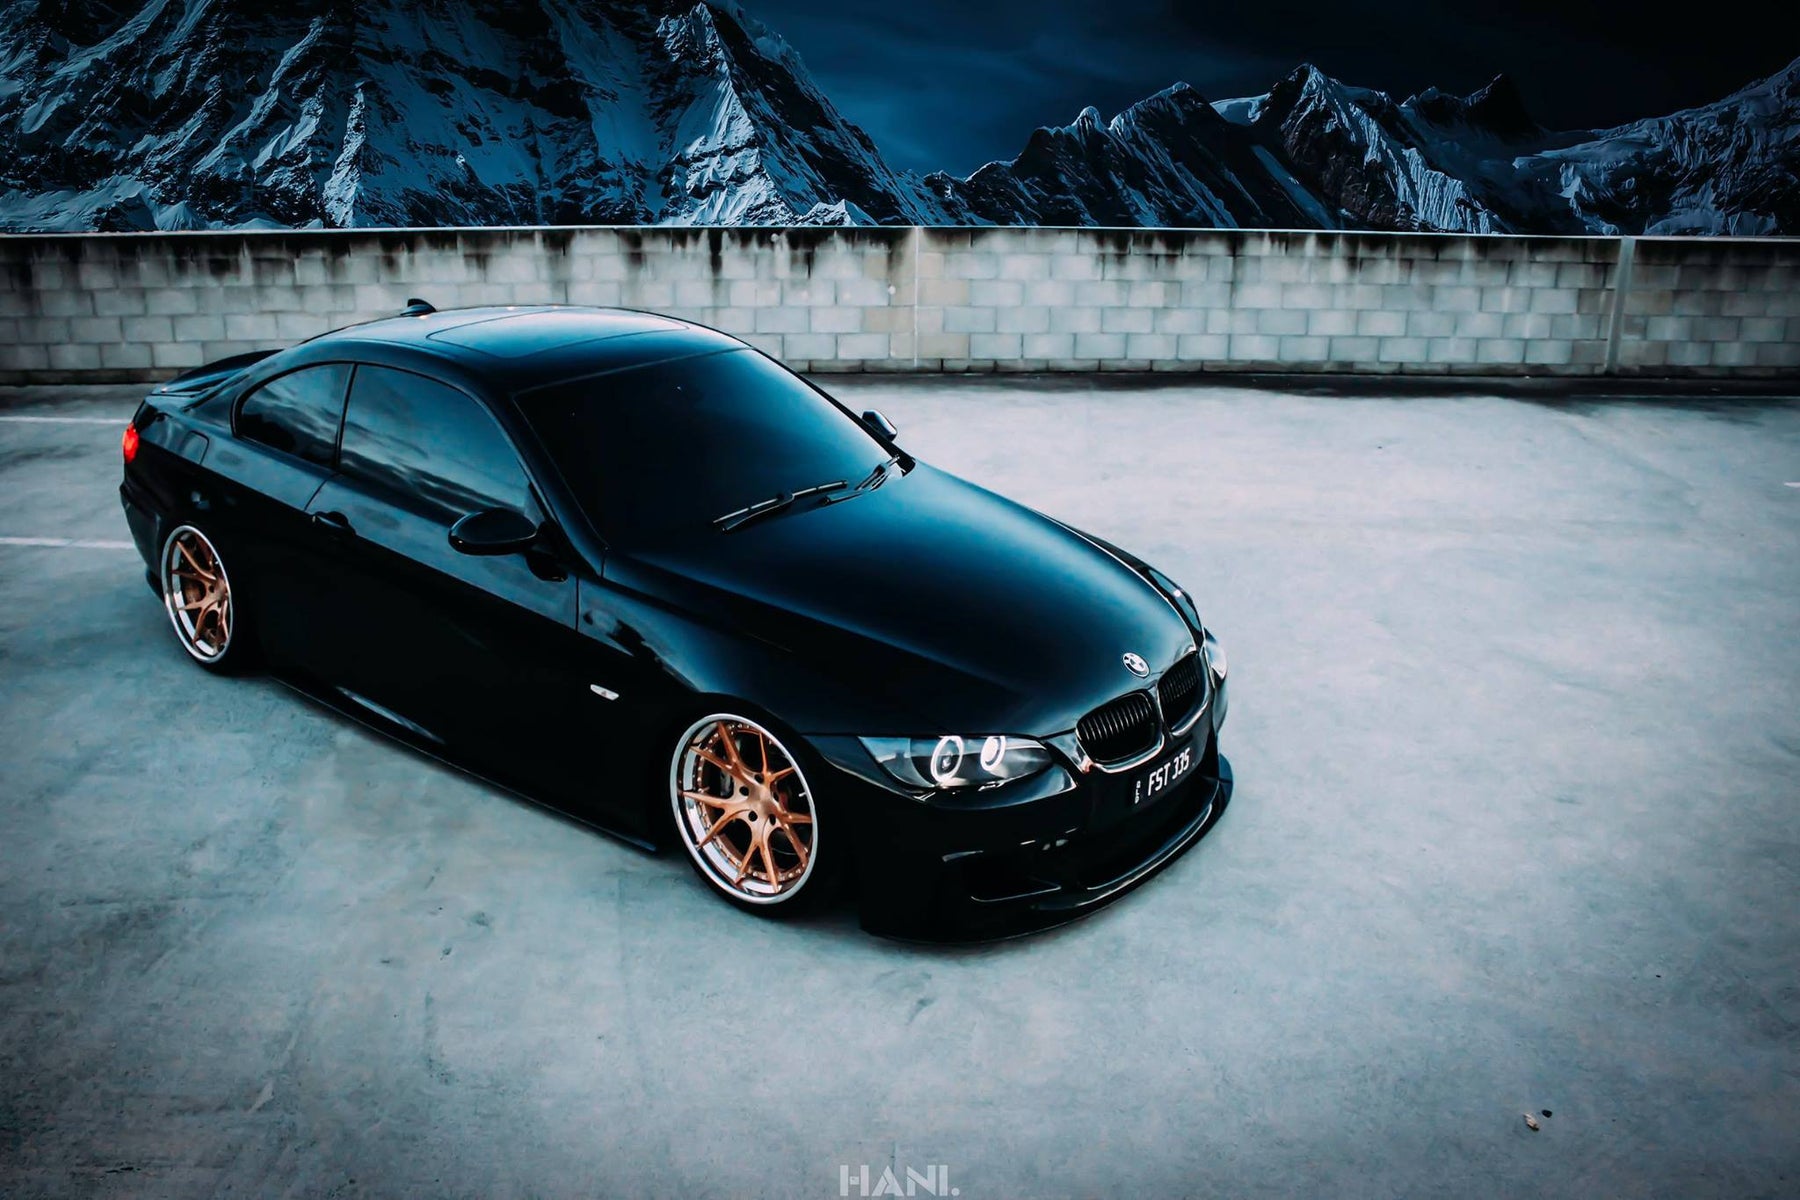 MODE Built - Bagged & Boosted 335i